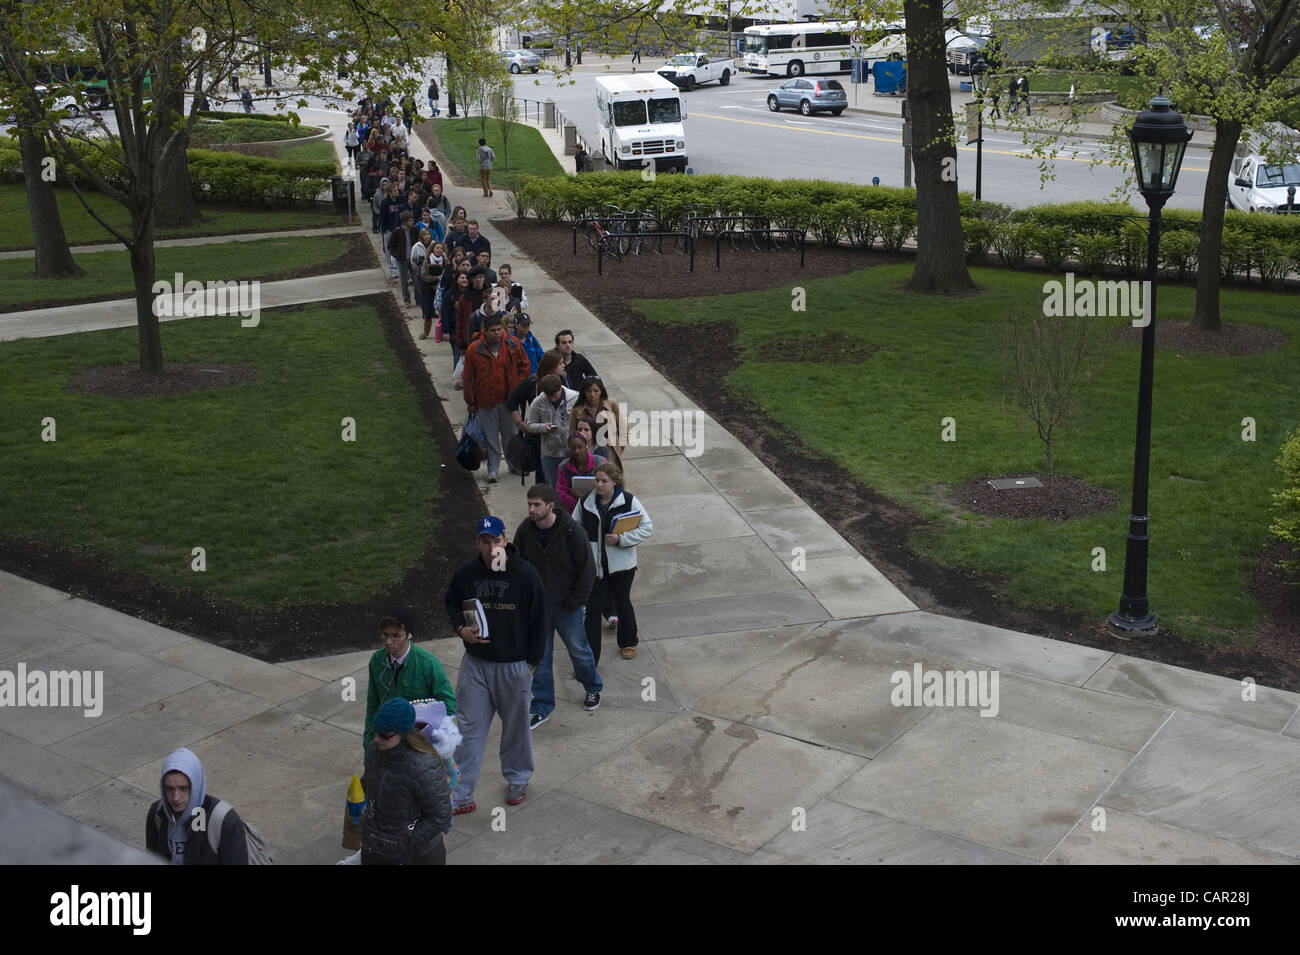 April 10, 2012 - Students queue in a security line outside the Cathedral of Learning at the University of Pittsburgh early Tuesday morning, April 10, 2012. 57 bomb threats have been received on campus since mid-February, causing increased security measures. Stock Photo